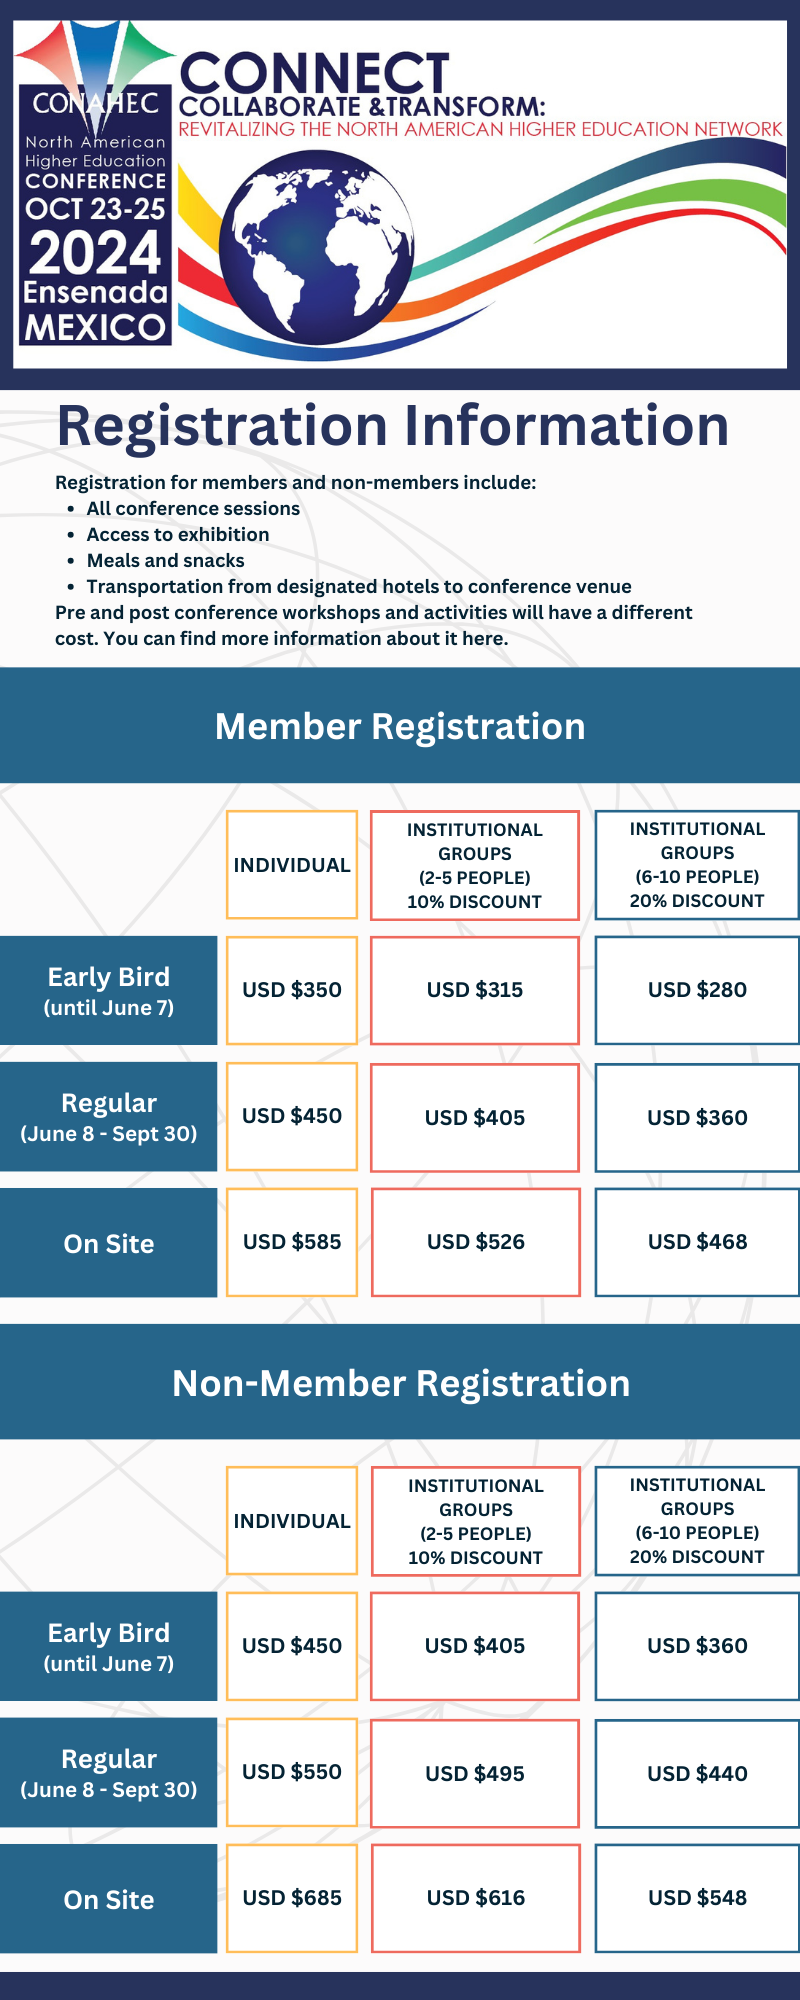 This image contains information about registration costs, dates, and attendees.